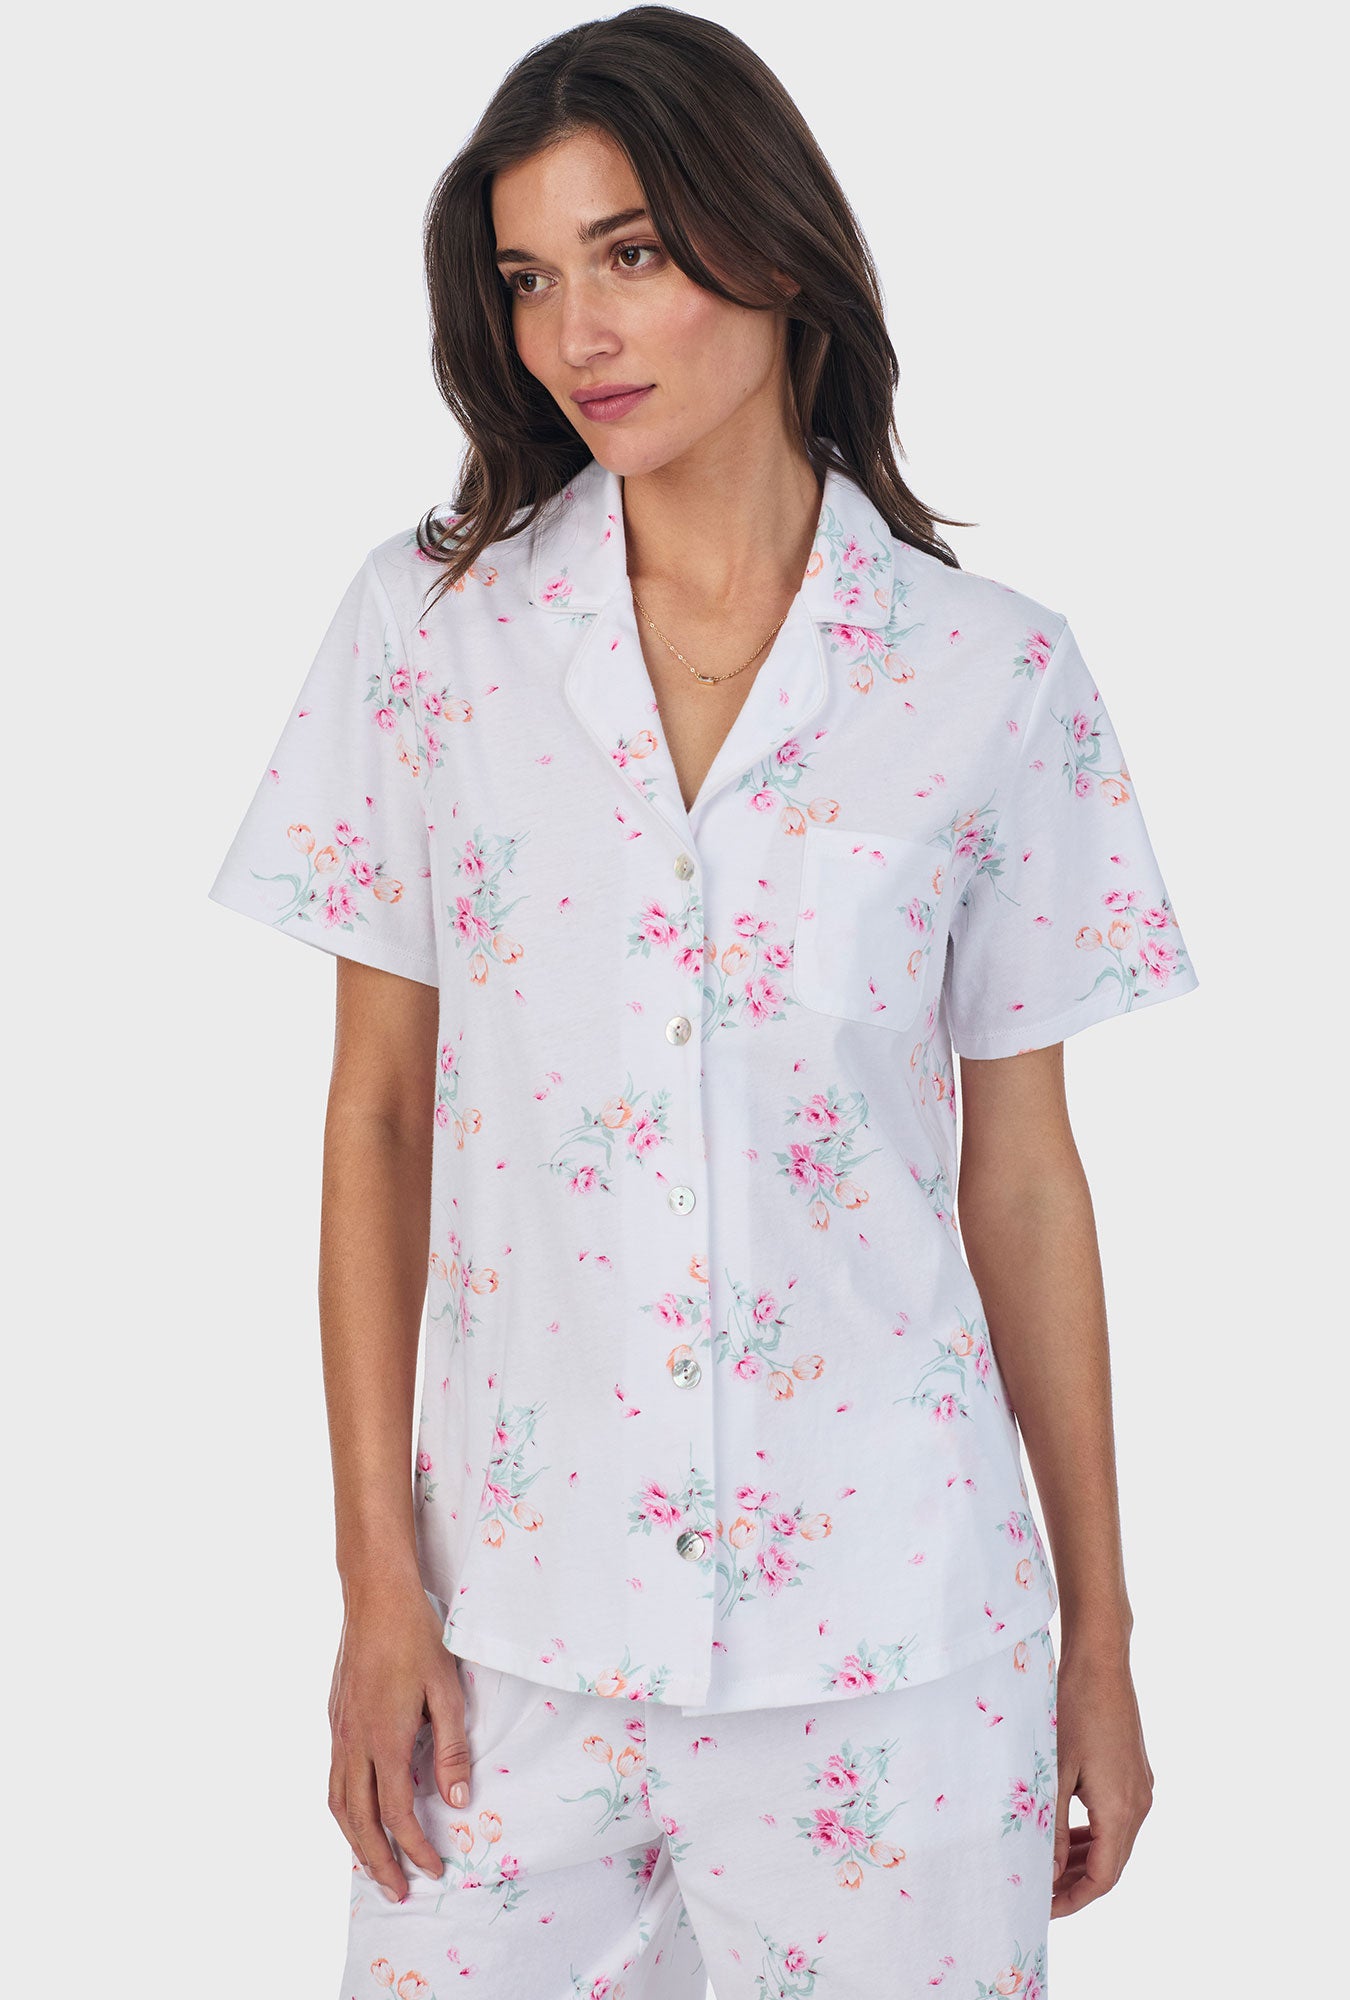 A lady wearing pink short sleeve cotton bermuda pajama set with floral bouquet print.